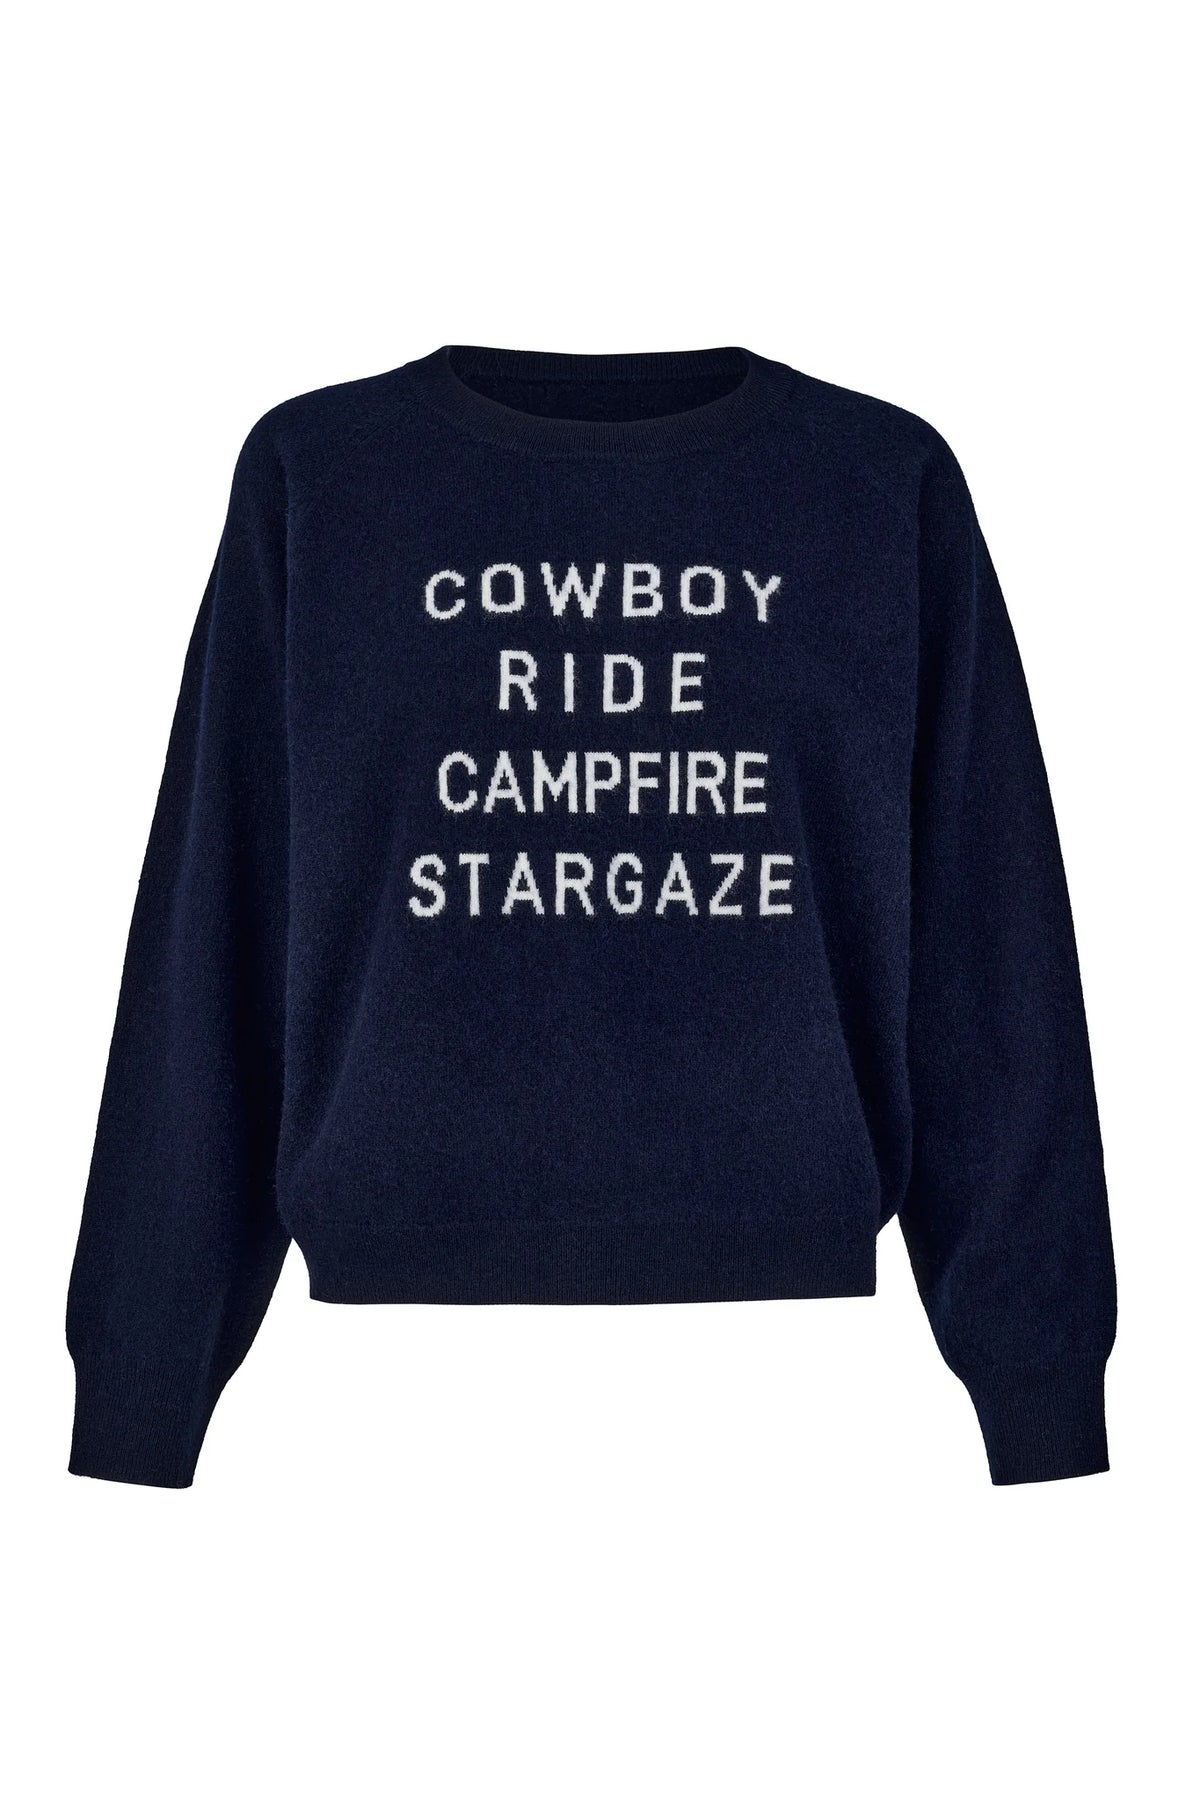 Navy wool and cashmere blend round neck jumper with cowboy slogan in navy and grey